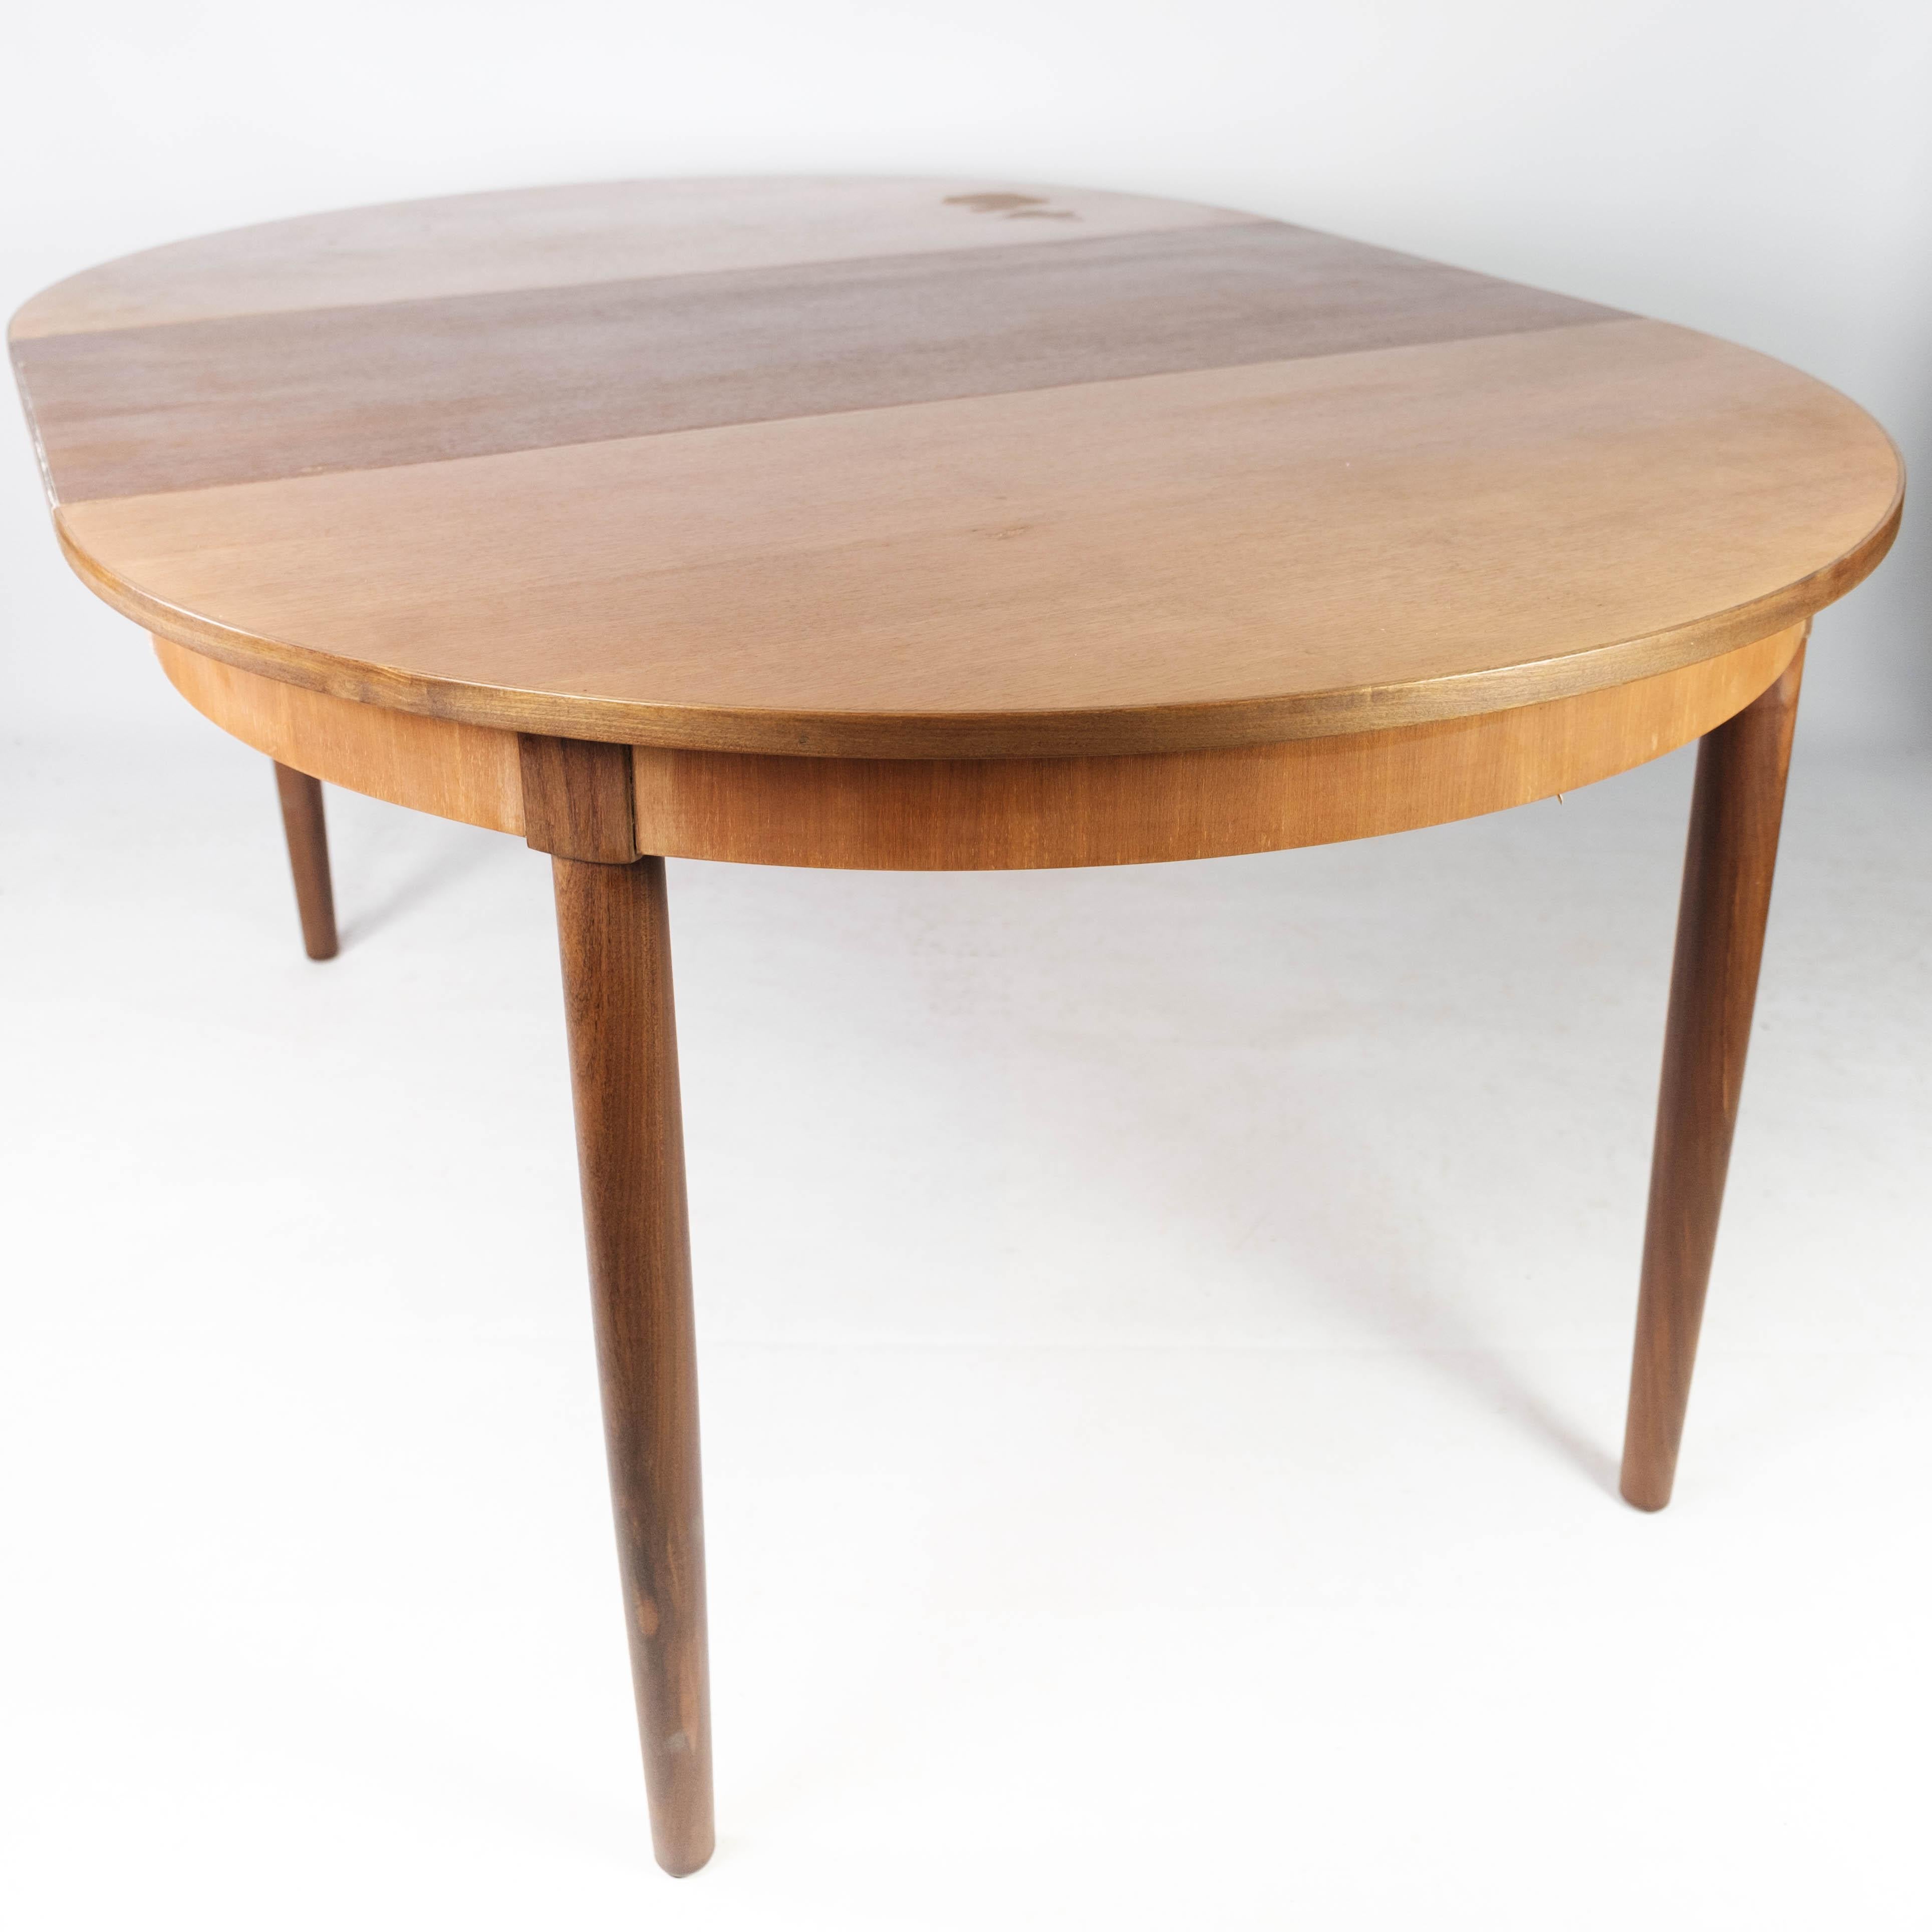 Dining Table Made In Teak With Extensions, Danish Design From 1960s For Sale 12